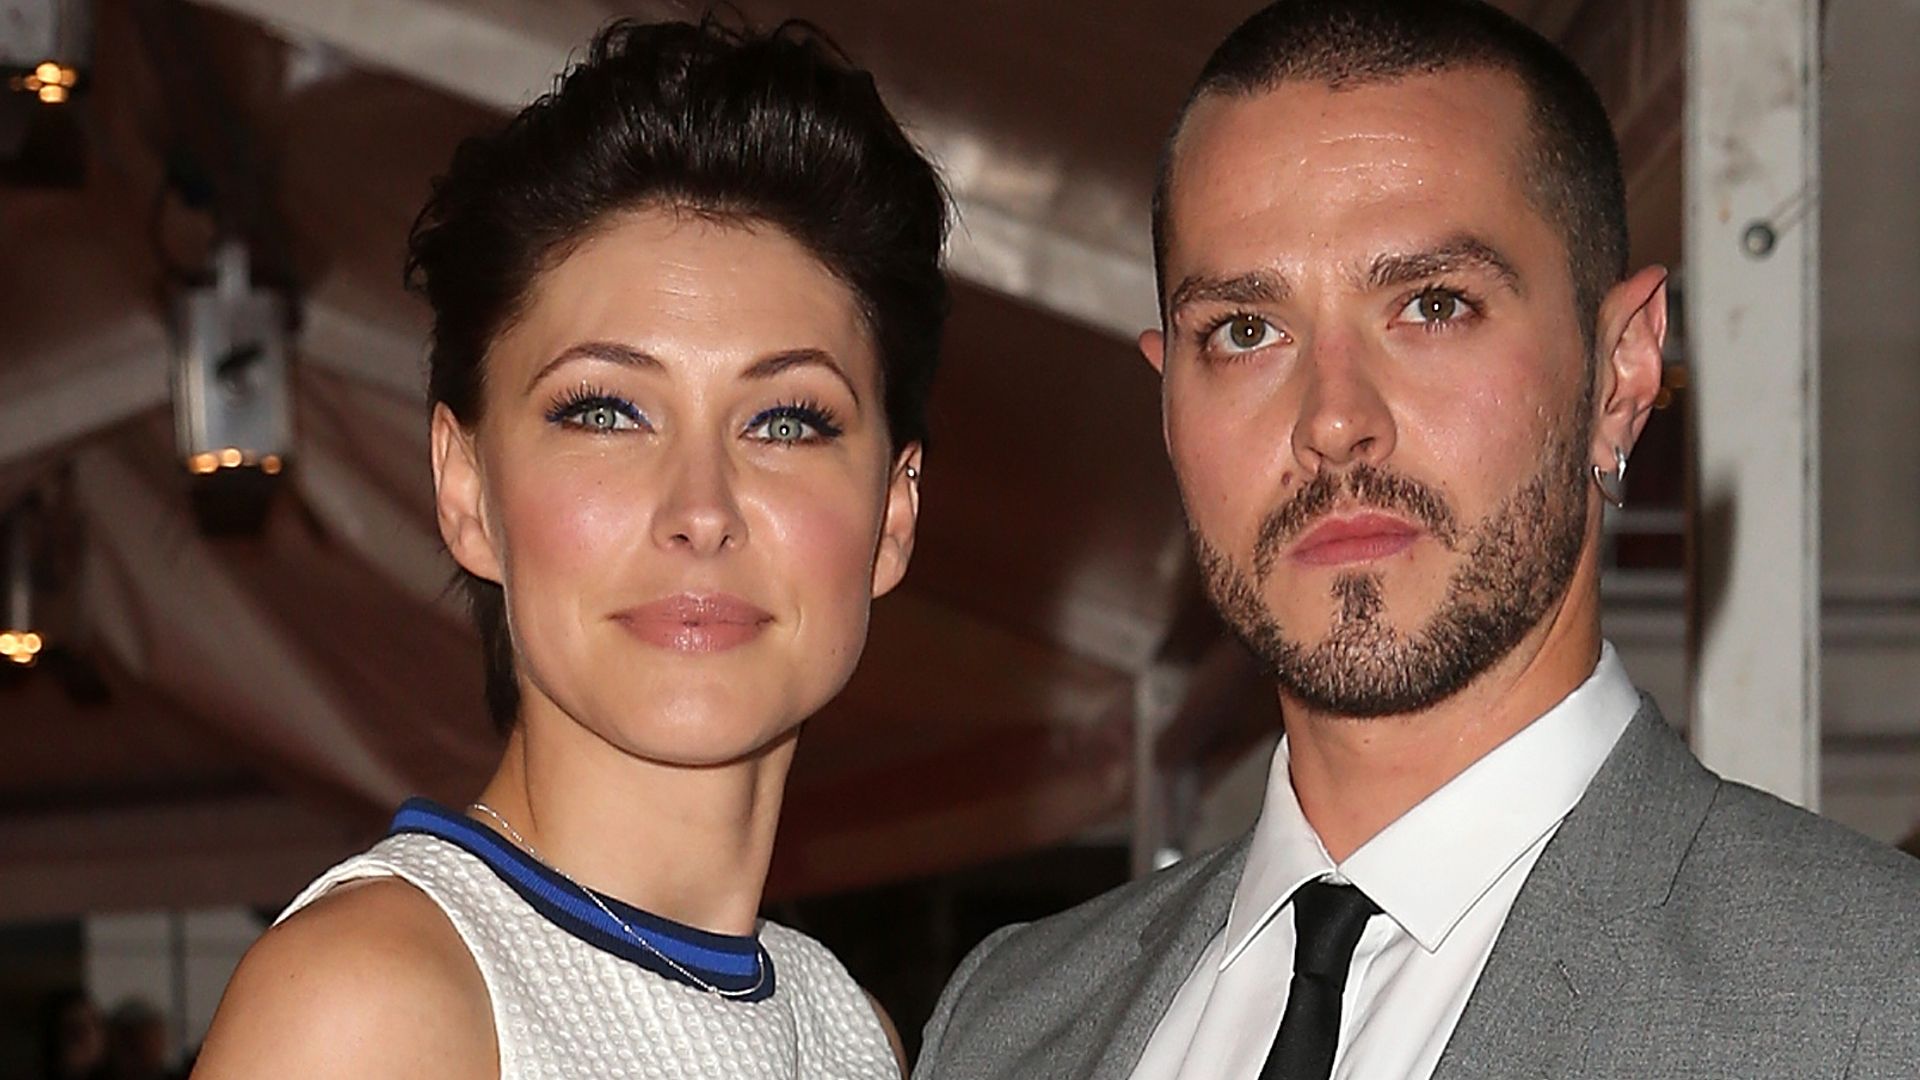 Emma Willis in a white dress and Matt Willis in a grey suit at the Glamour Women Of The Year Awards